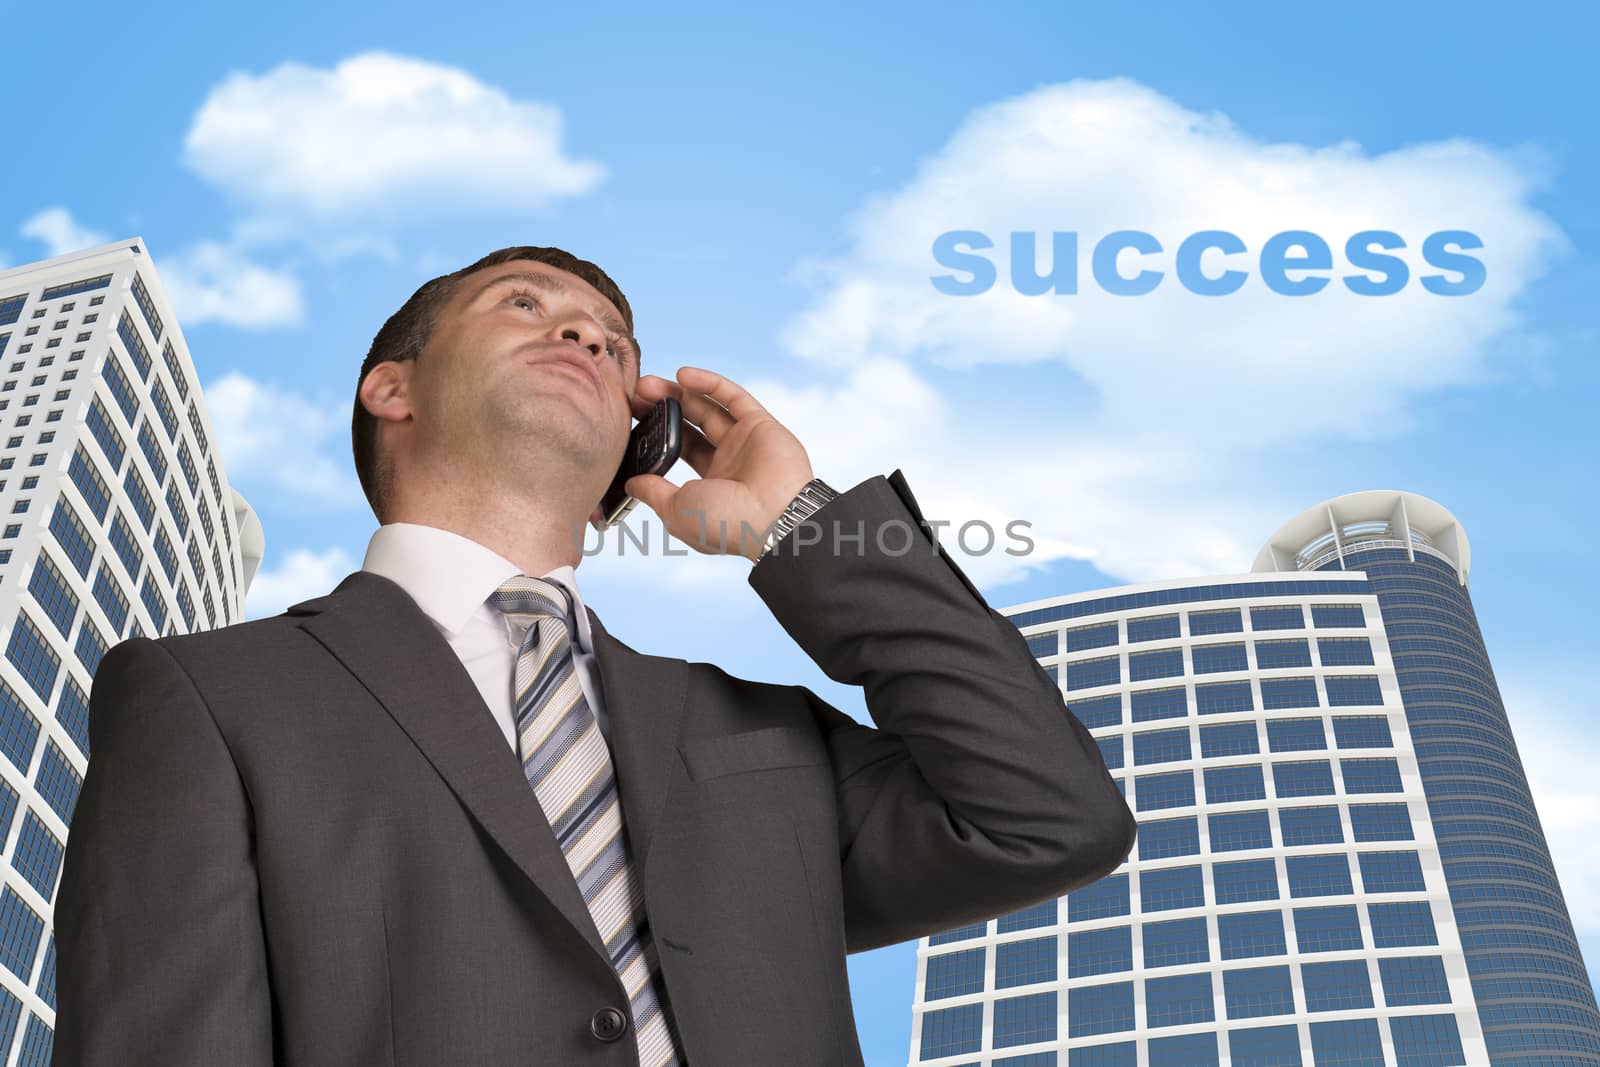 Businessman talking on the phone. Skyscrapers and cloud with word success in background